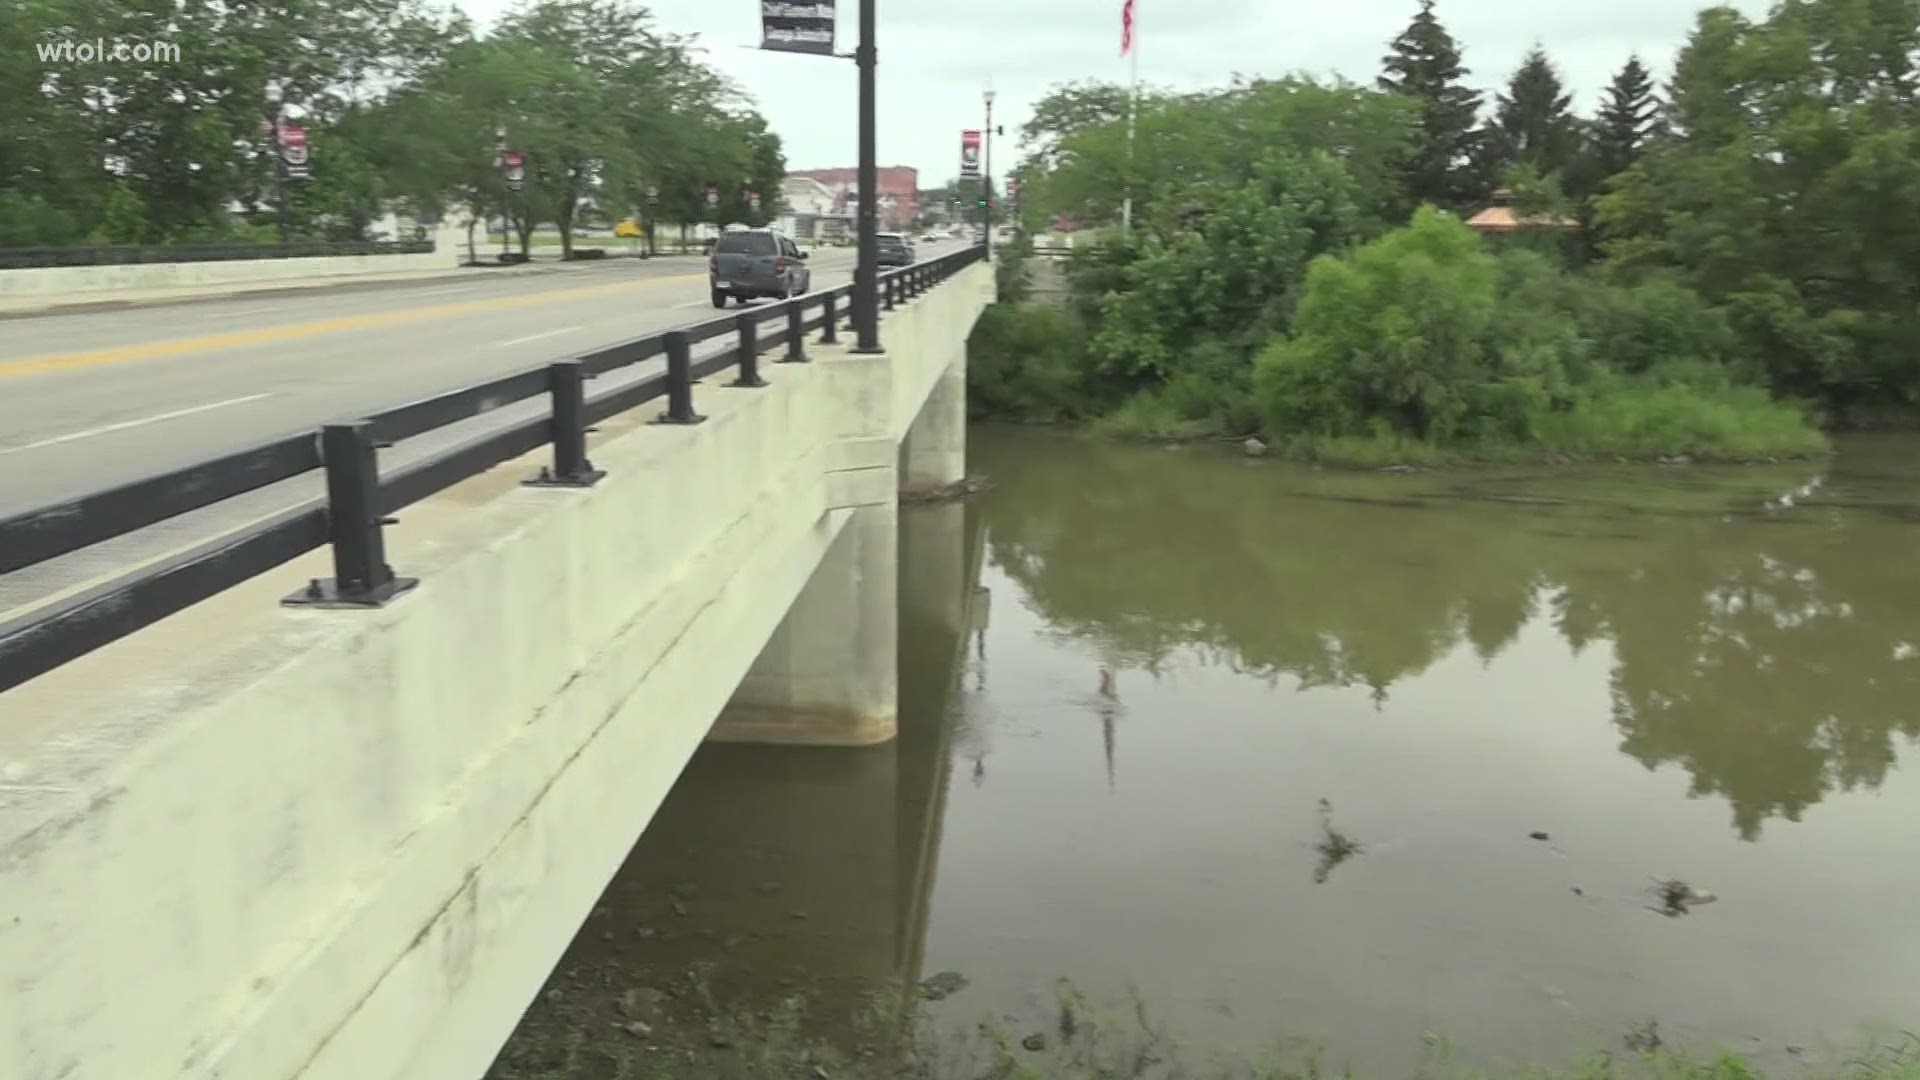 The 700-acre runoff basin is expected to lower the 100-year flood mark in Findlay by 18 inches.